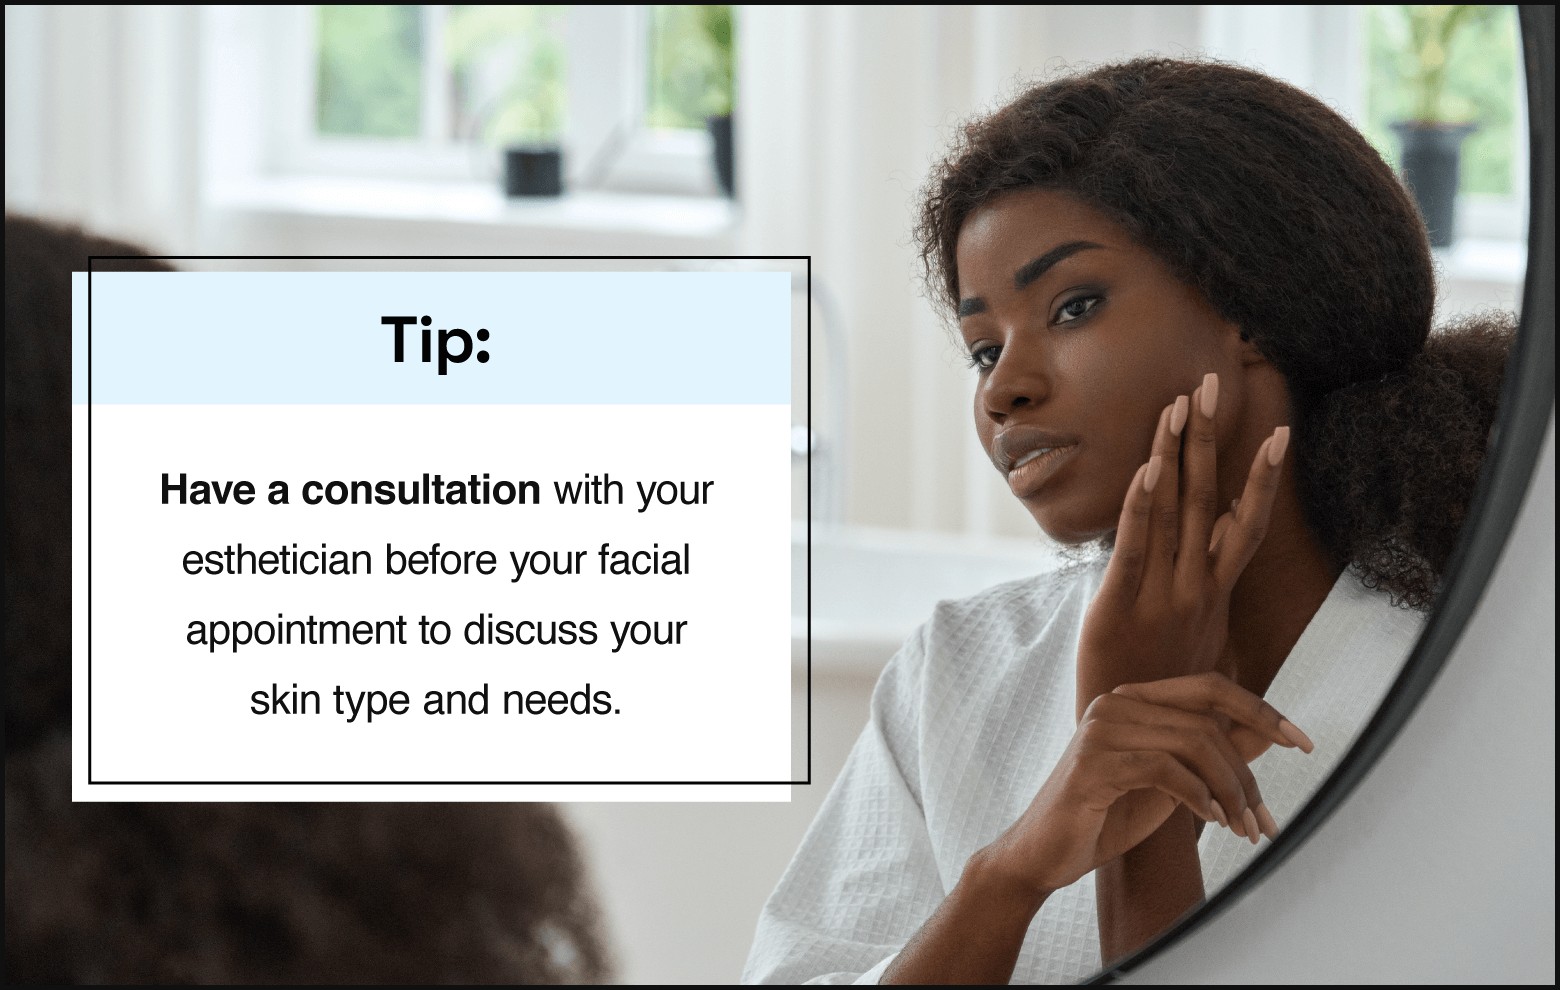 text on the left saying “tip: have a consultation withyour esthetician before your facial appointment to discuss your skin type and needs.” with photo on the right showing person with natural hair pulled back, wearing a robe, and looking at reflection in the mirror